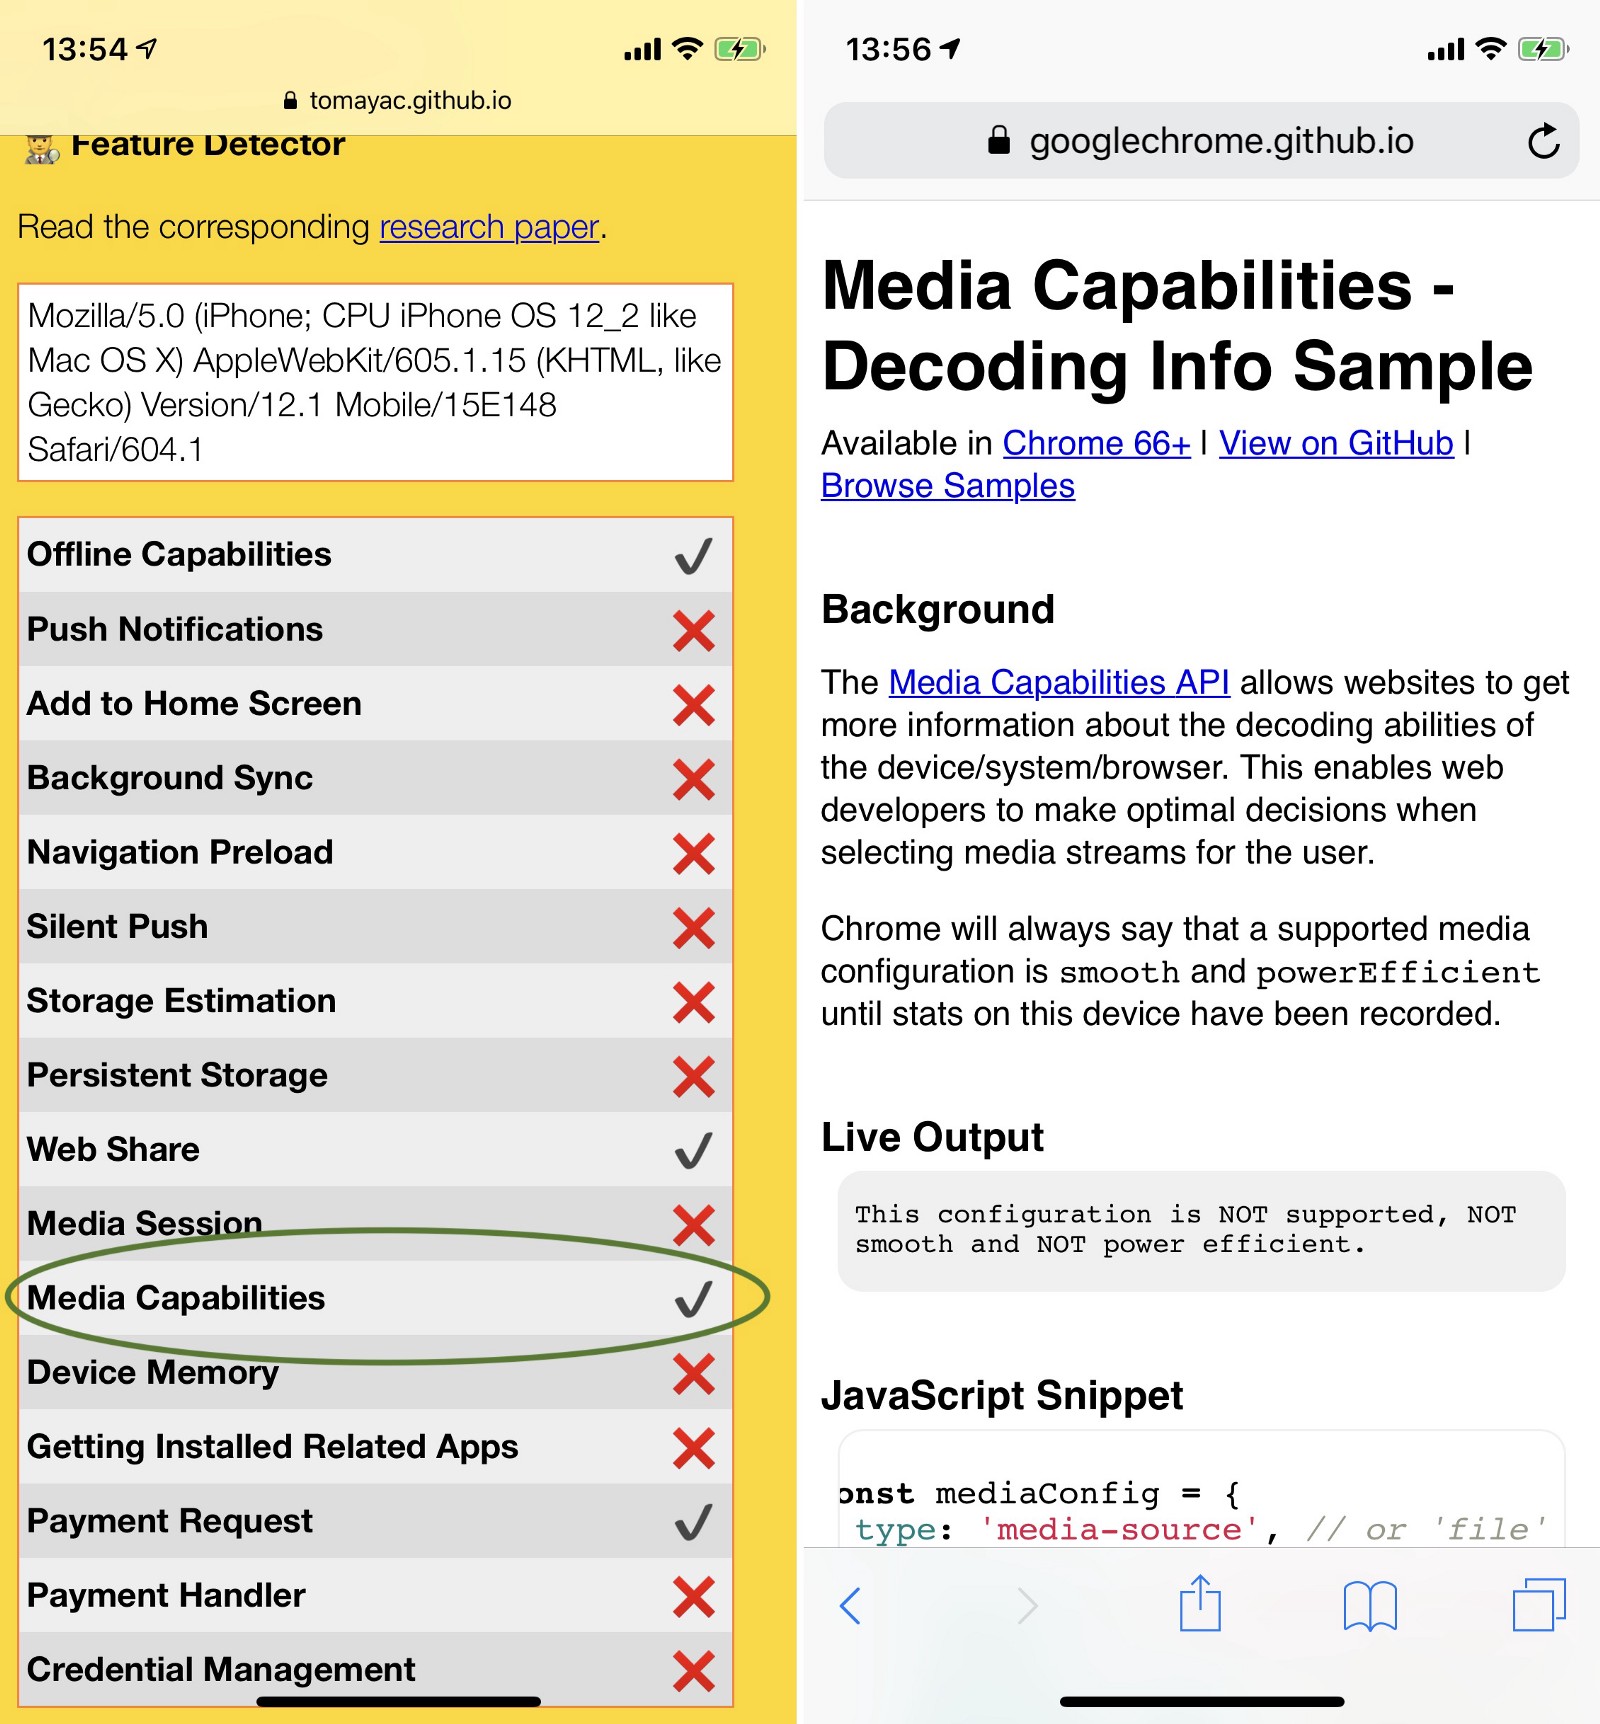 Media Capabilities API support is the forth checkmark in PWA Feature Detector (left). The demo (right) lets the app know that the media configuration will not be supported, not play smoothly, and not be power efficient.